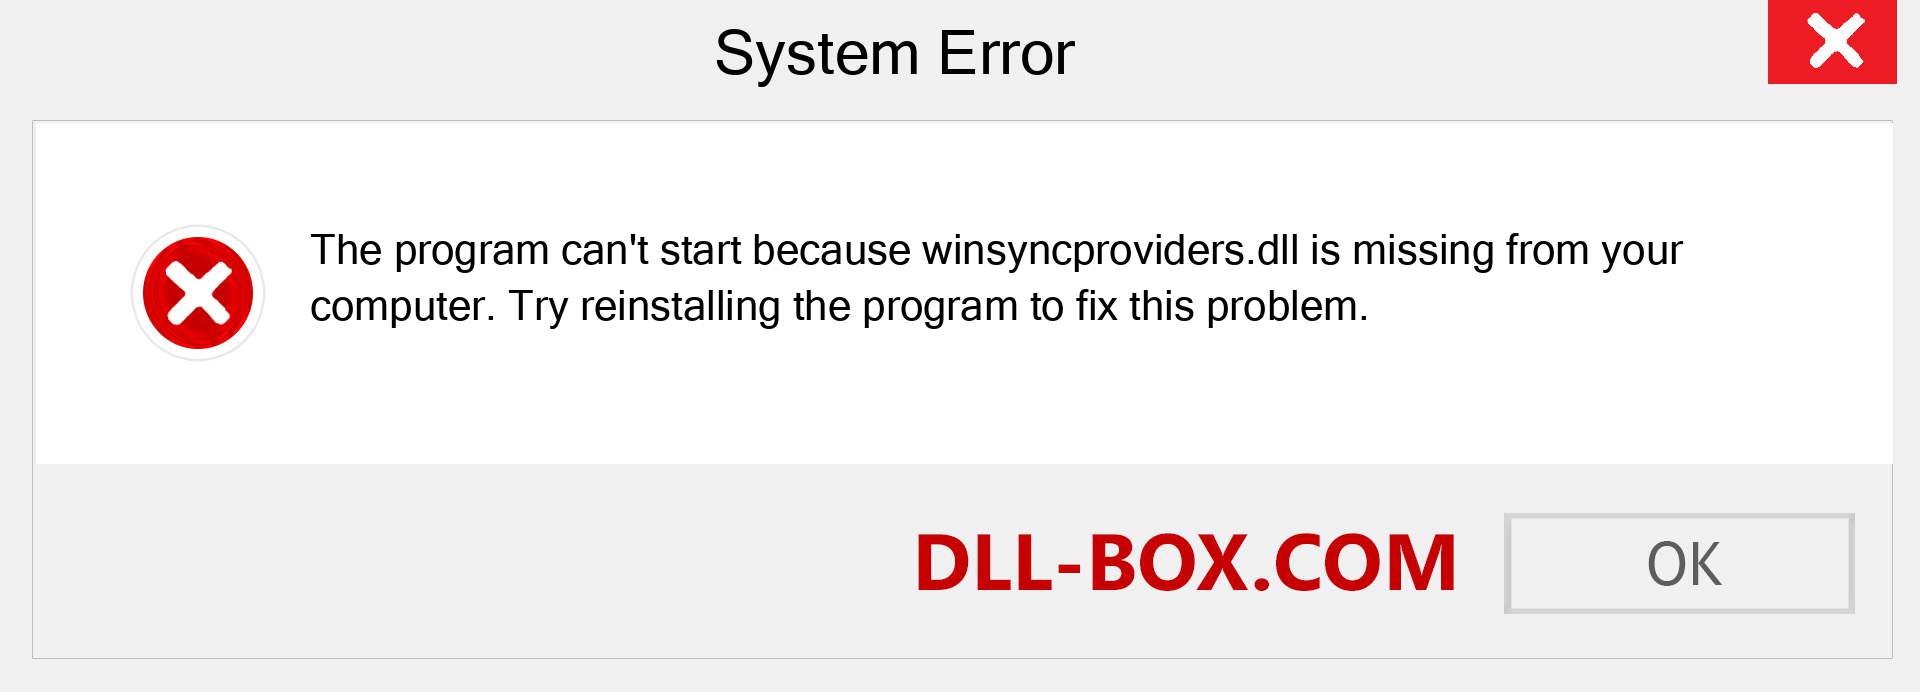  winsyncproviders.dll file is missing?. Download for Windows 7, 8, 10 - Fix  winsyncproviders dll Missing Error on Windows, photos, images